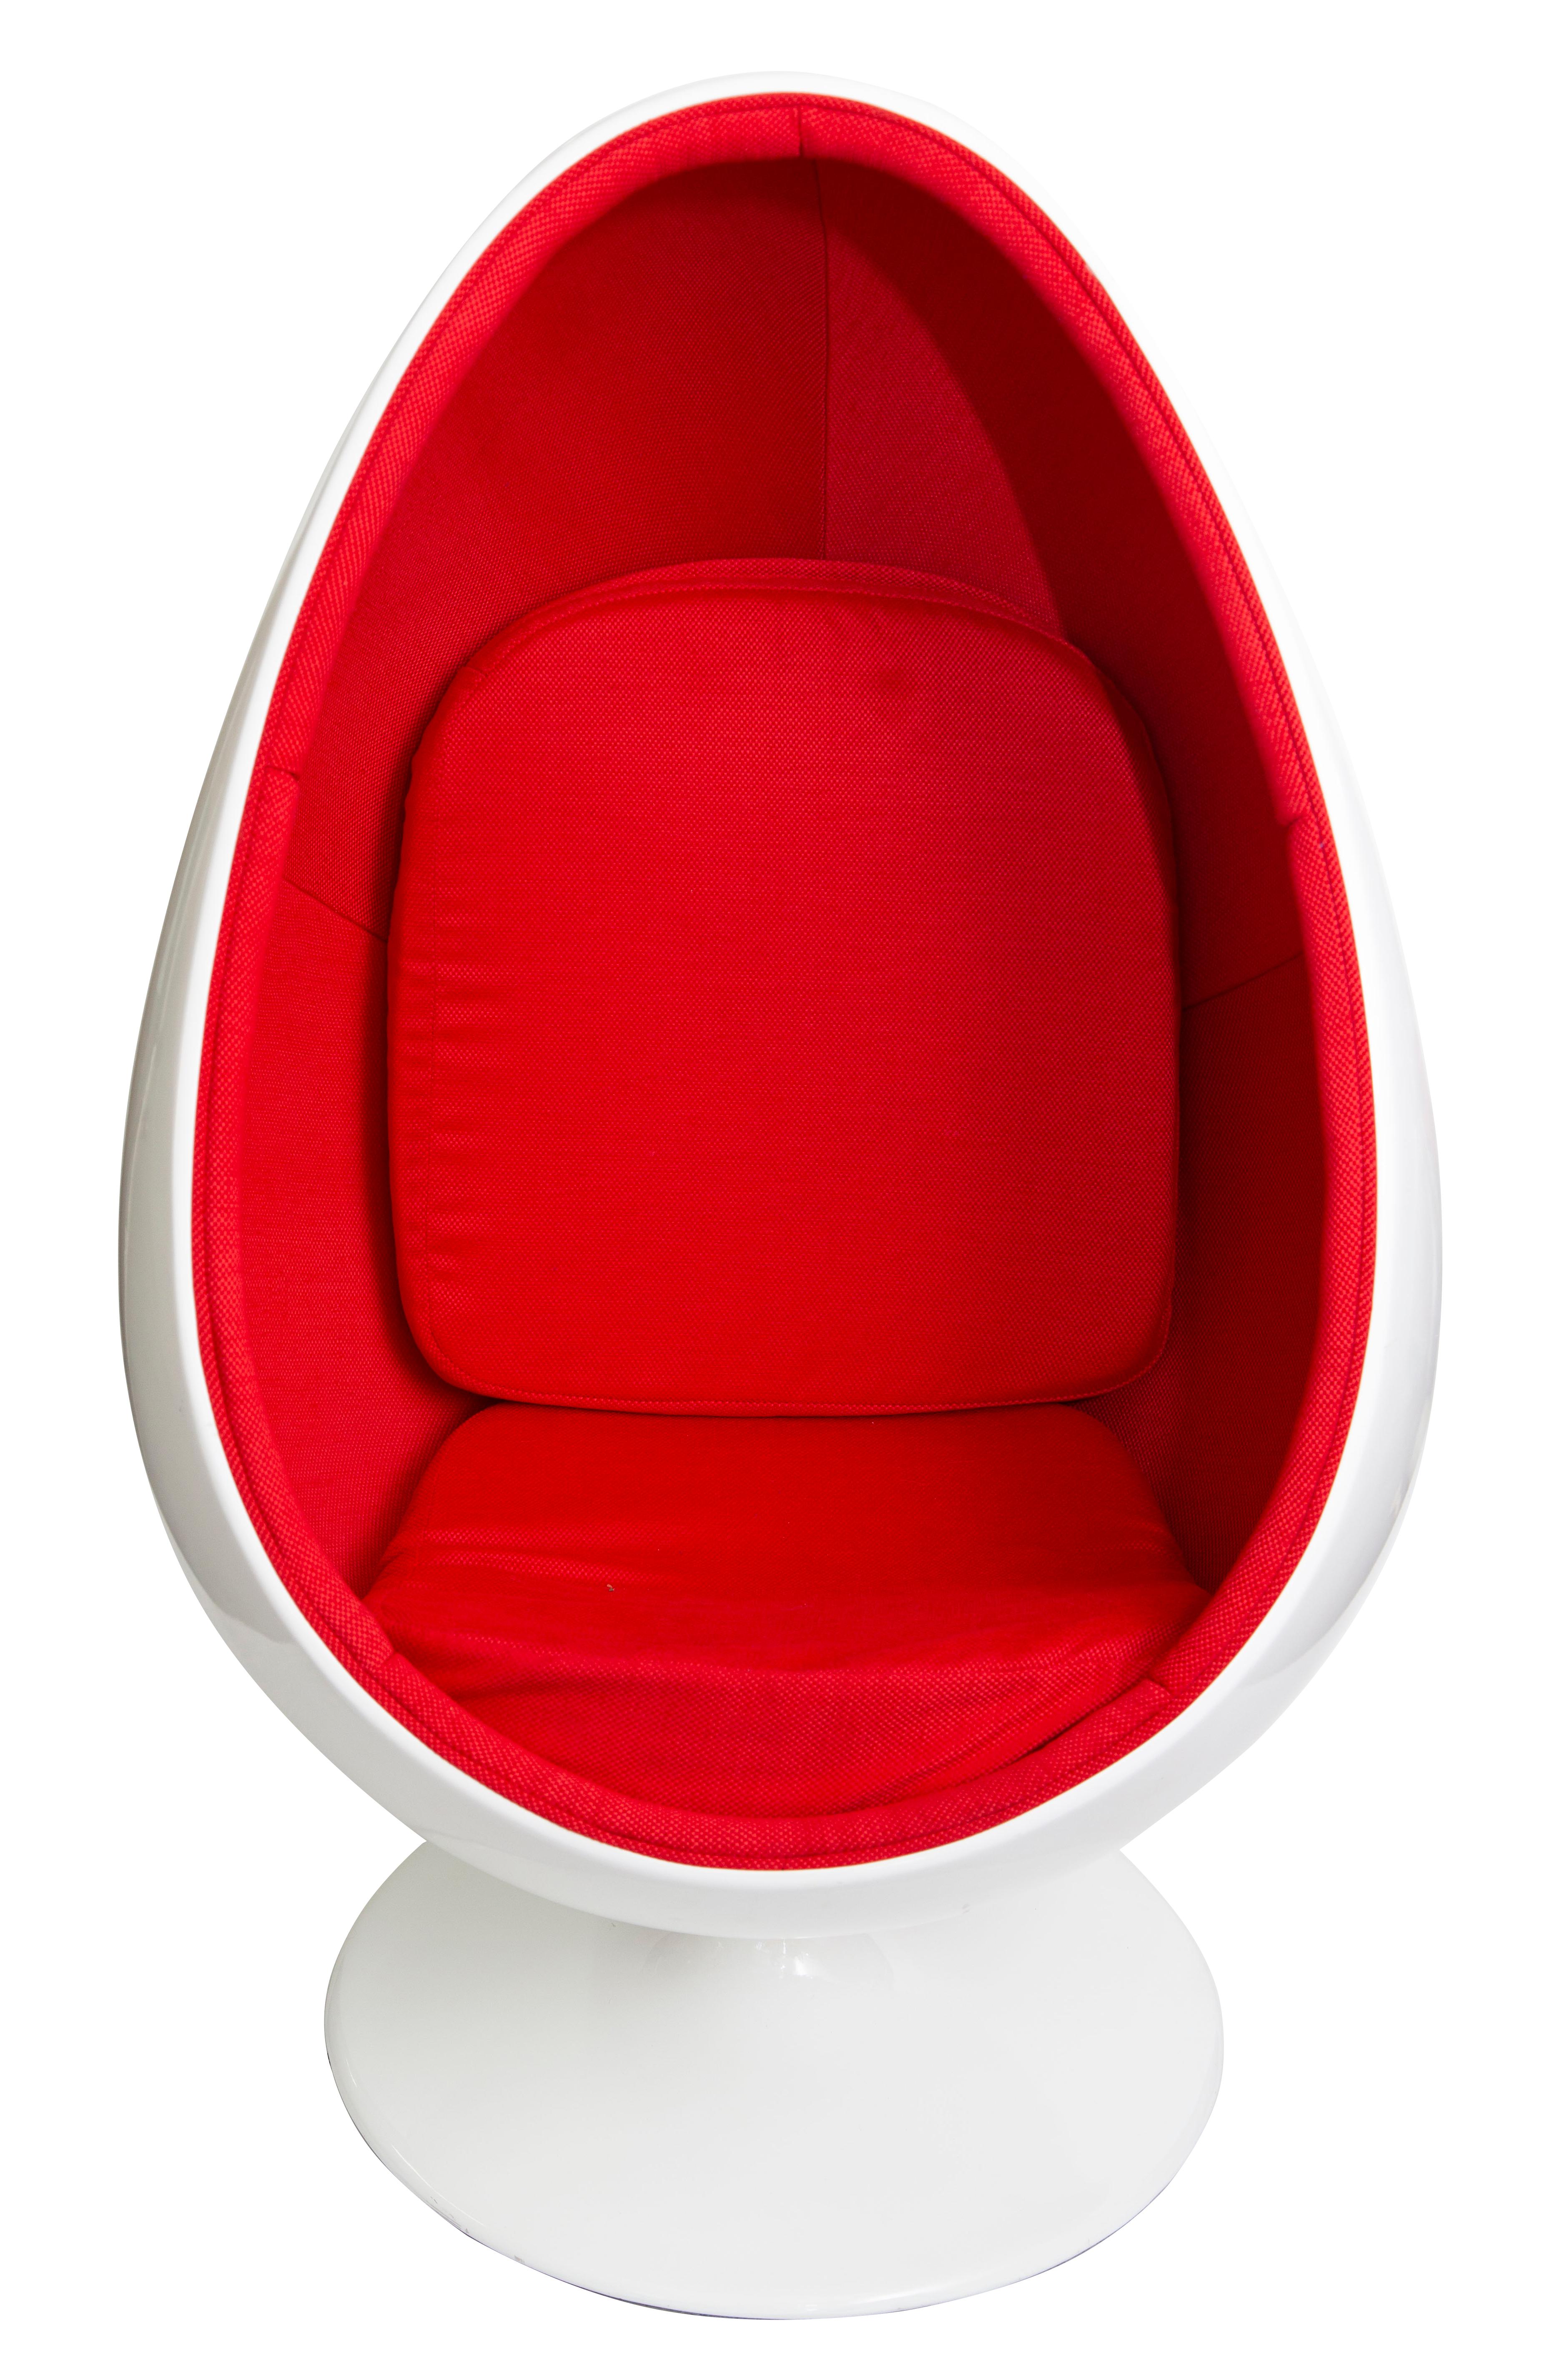 Iconic Egg Chair by Henrik Thor Larsen. Made in mid-1960s in Sweden.